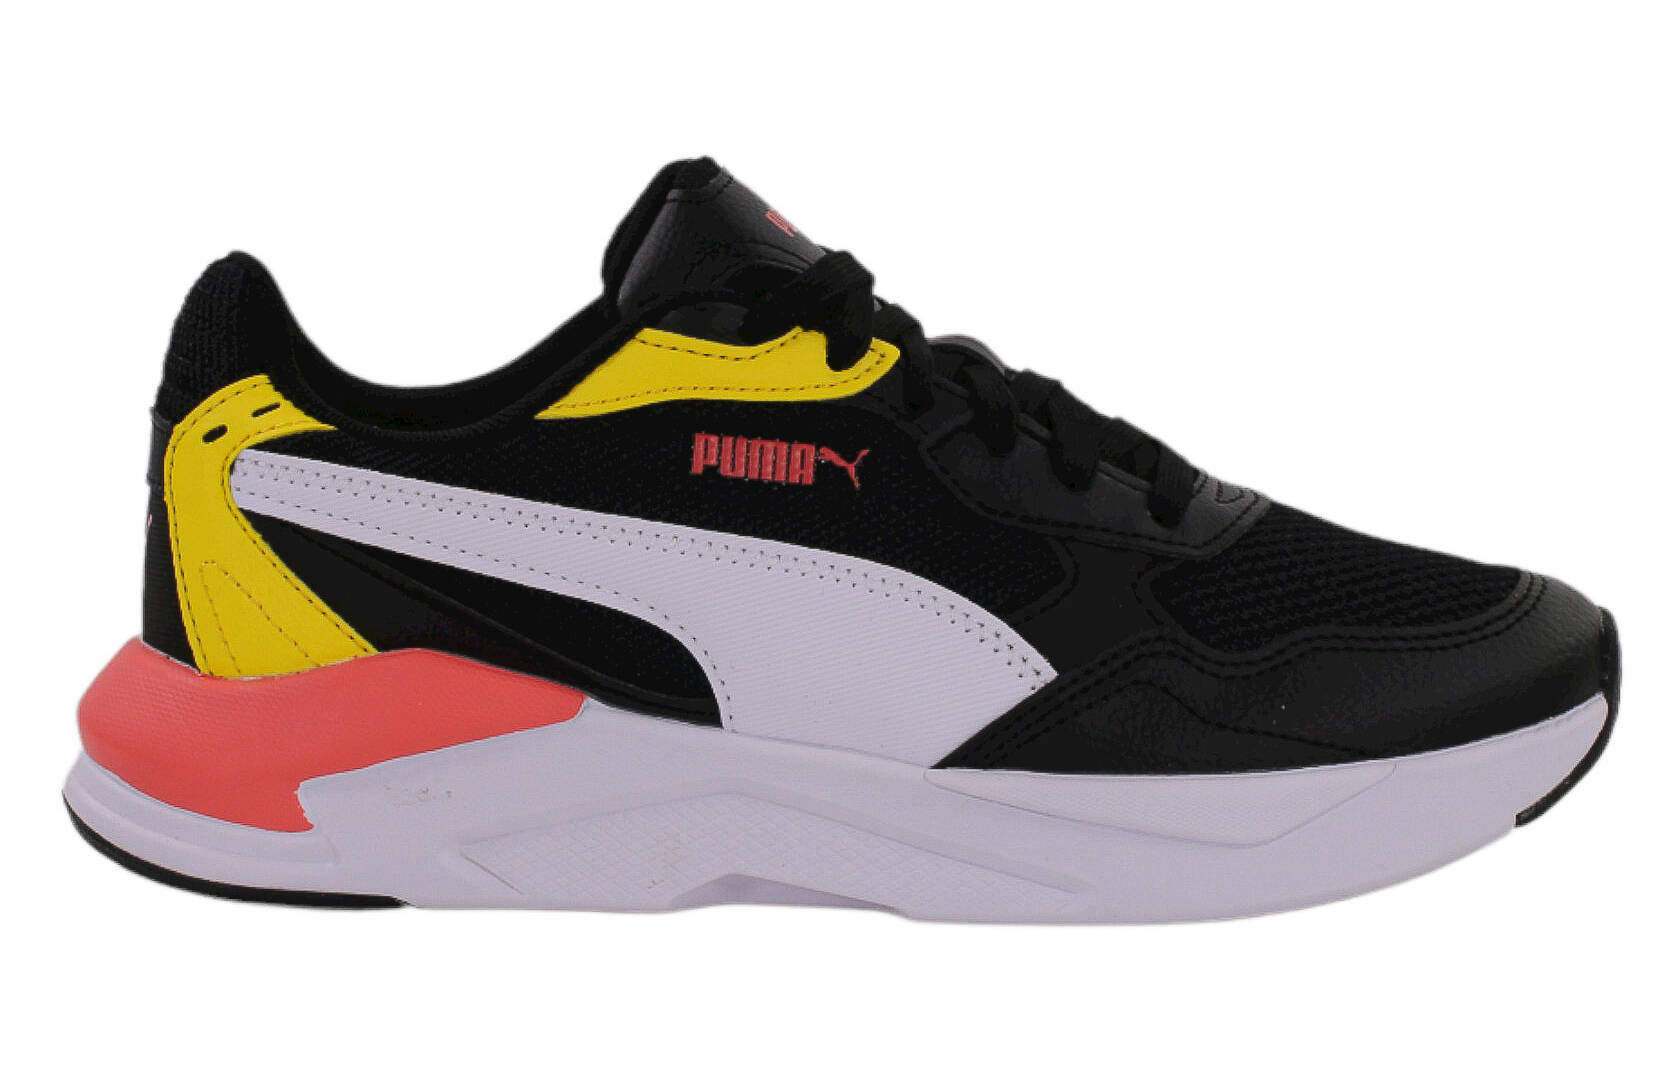 Puma X-RAY Speed Lite youth shoes 385524 09